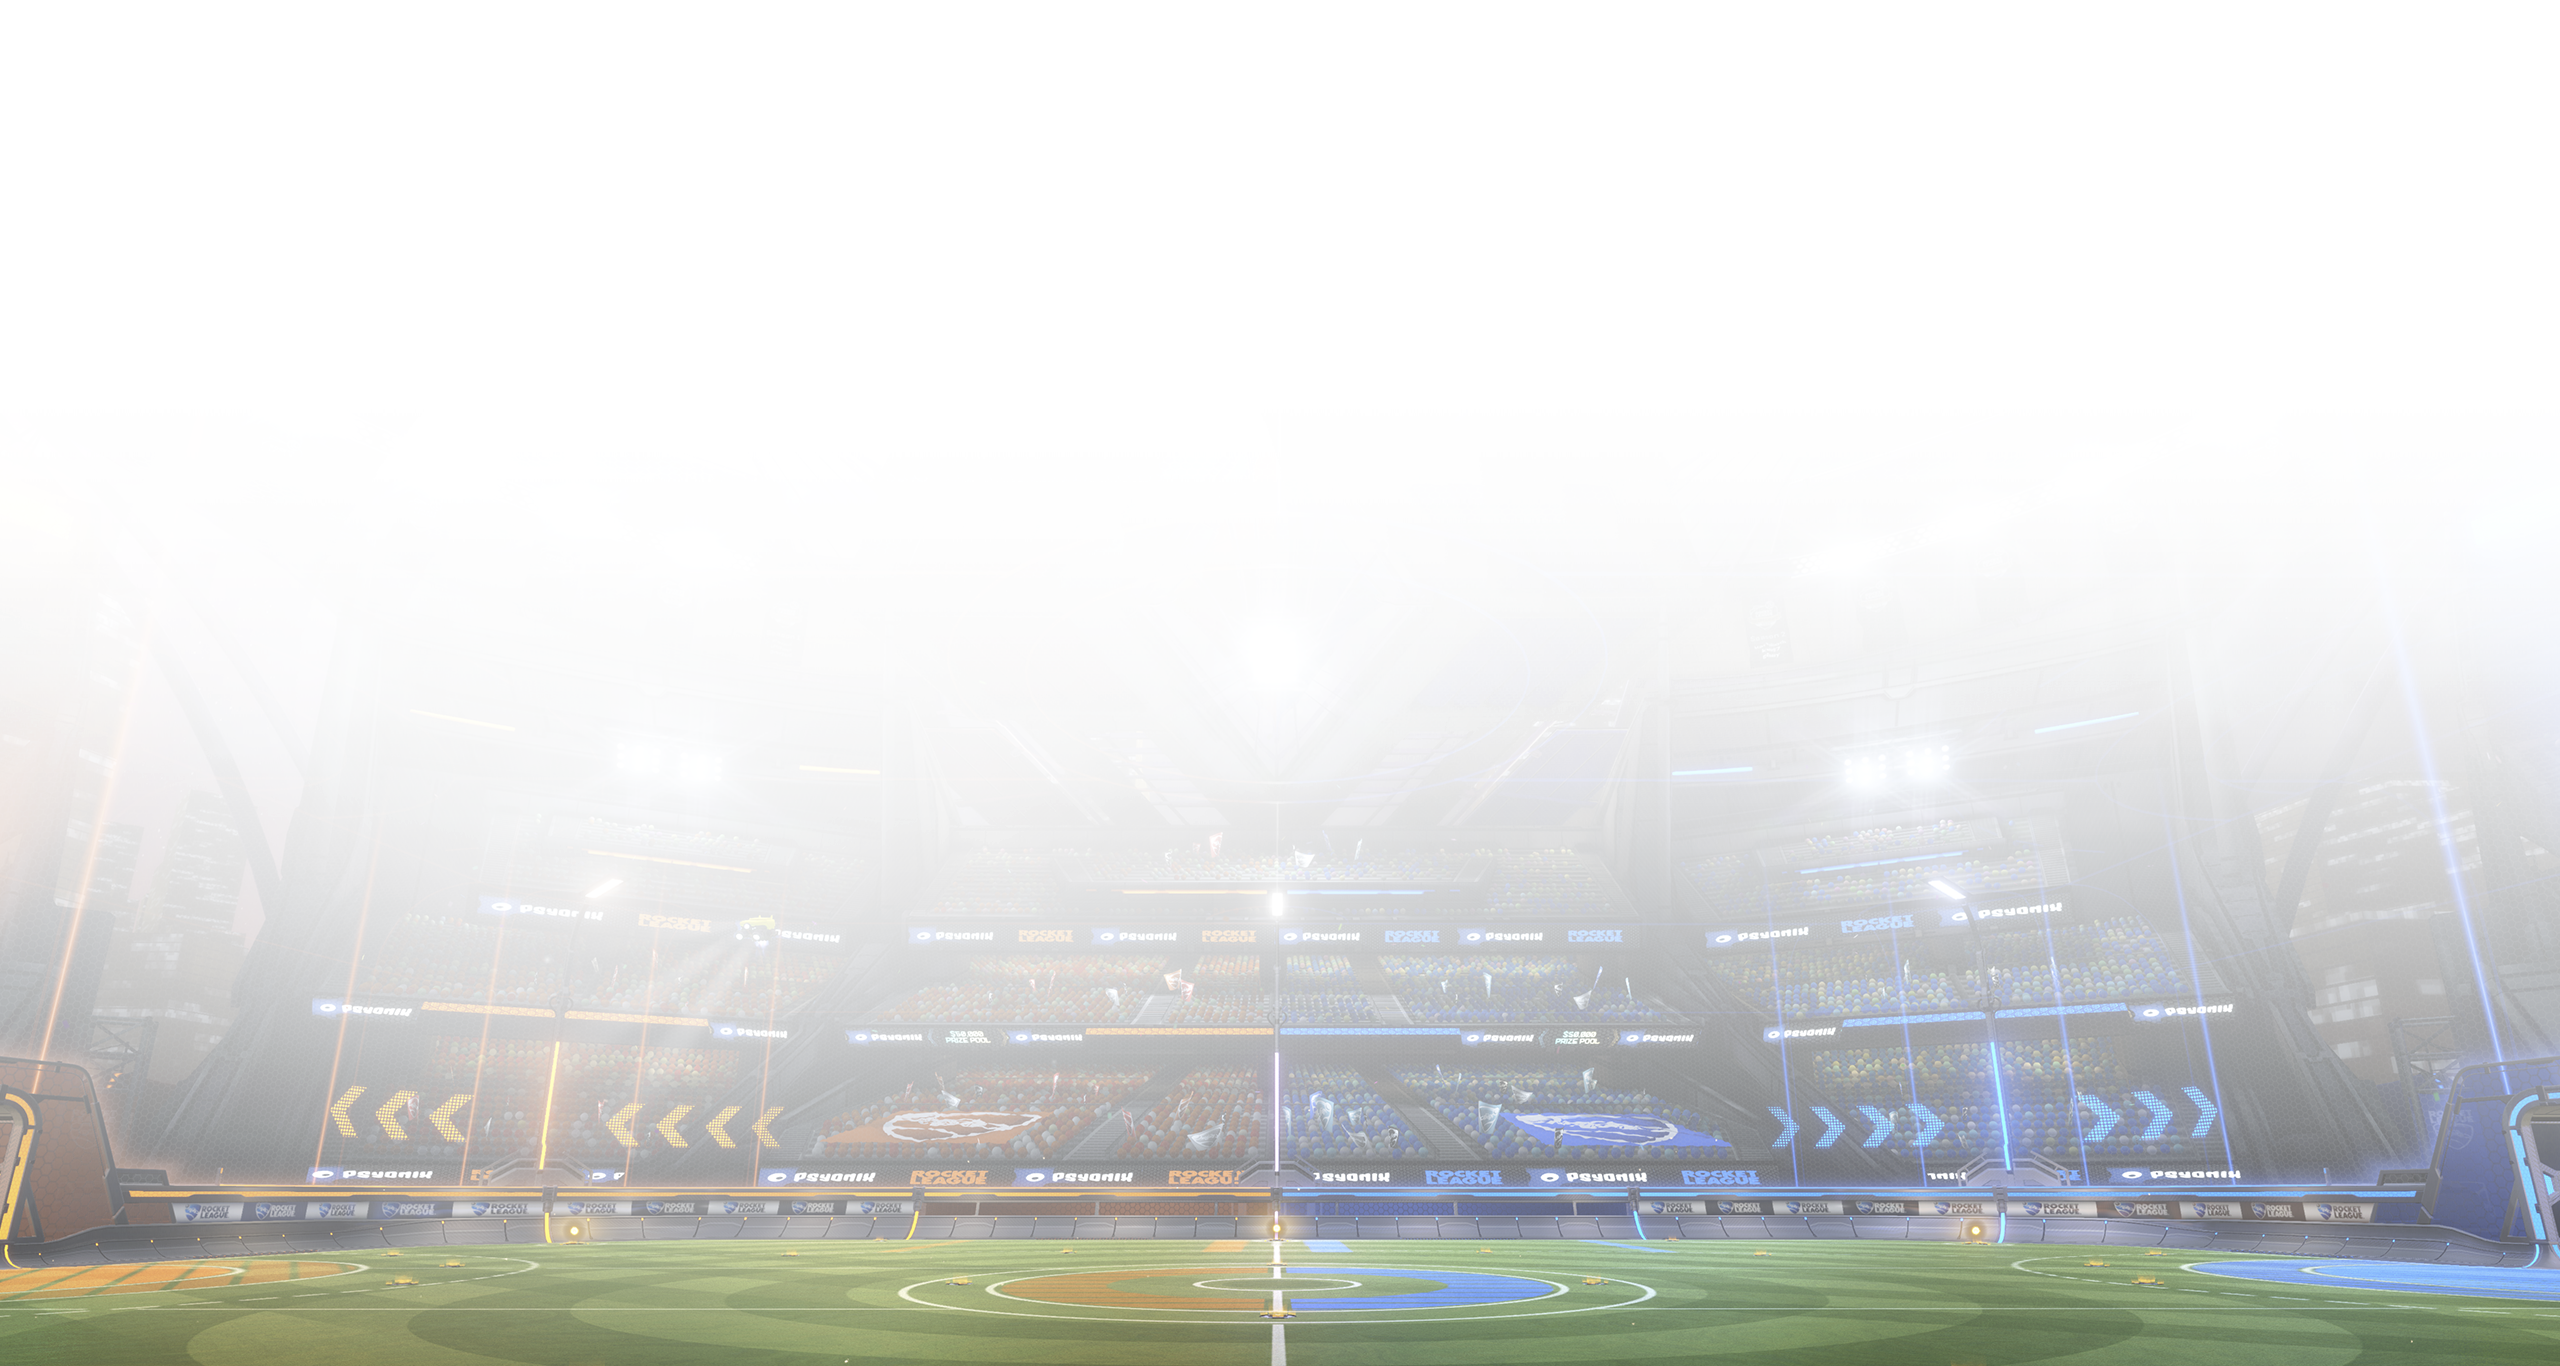 Rocket league screenshot showing a game pitch surrounded by spectator stands